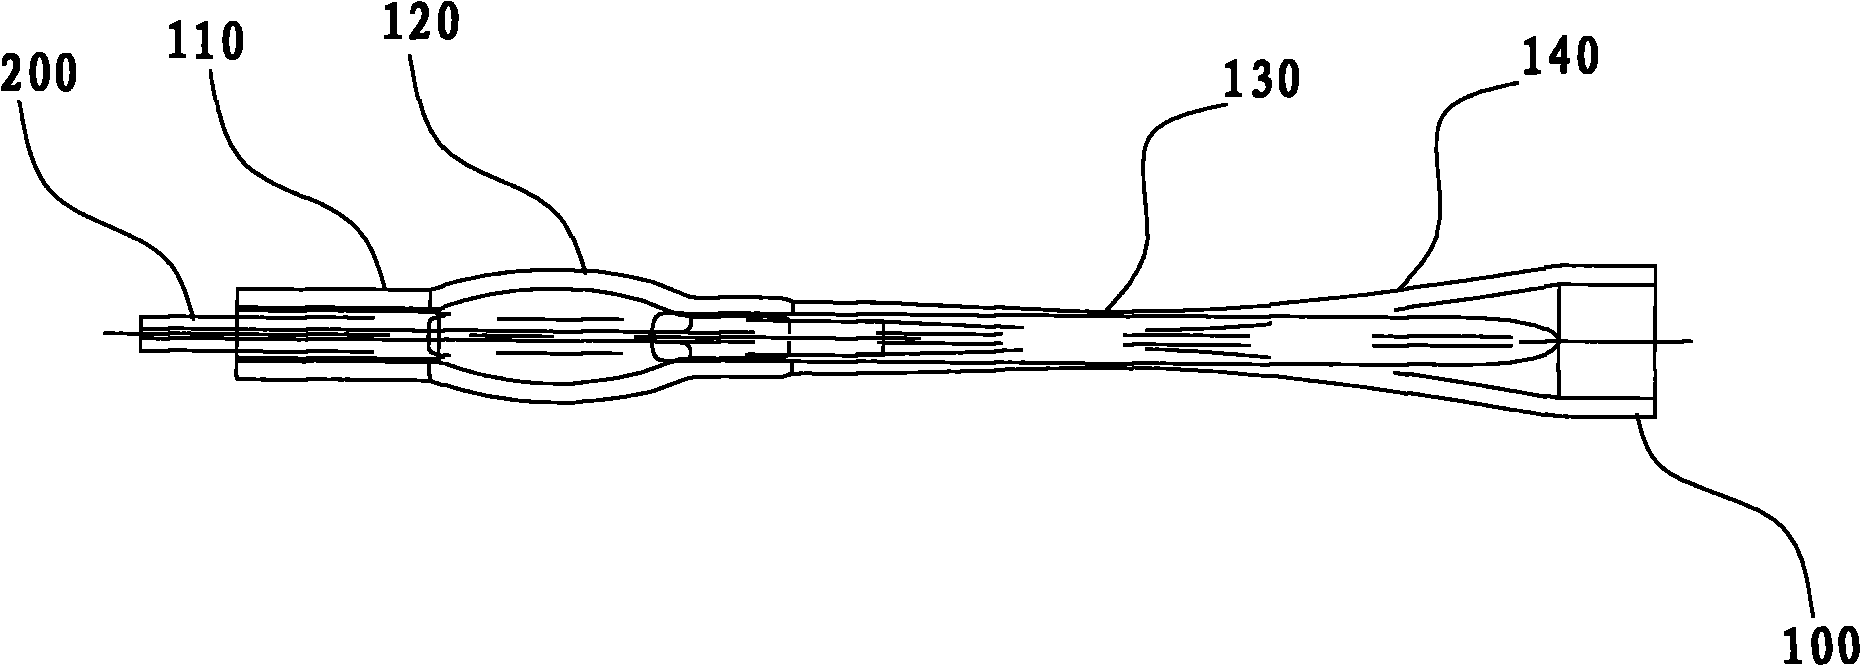 Refrigeration equipment and transition pipe for same